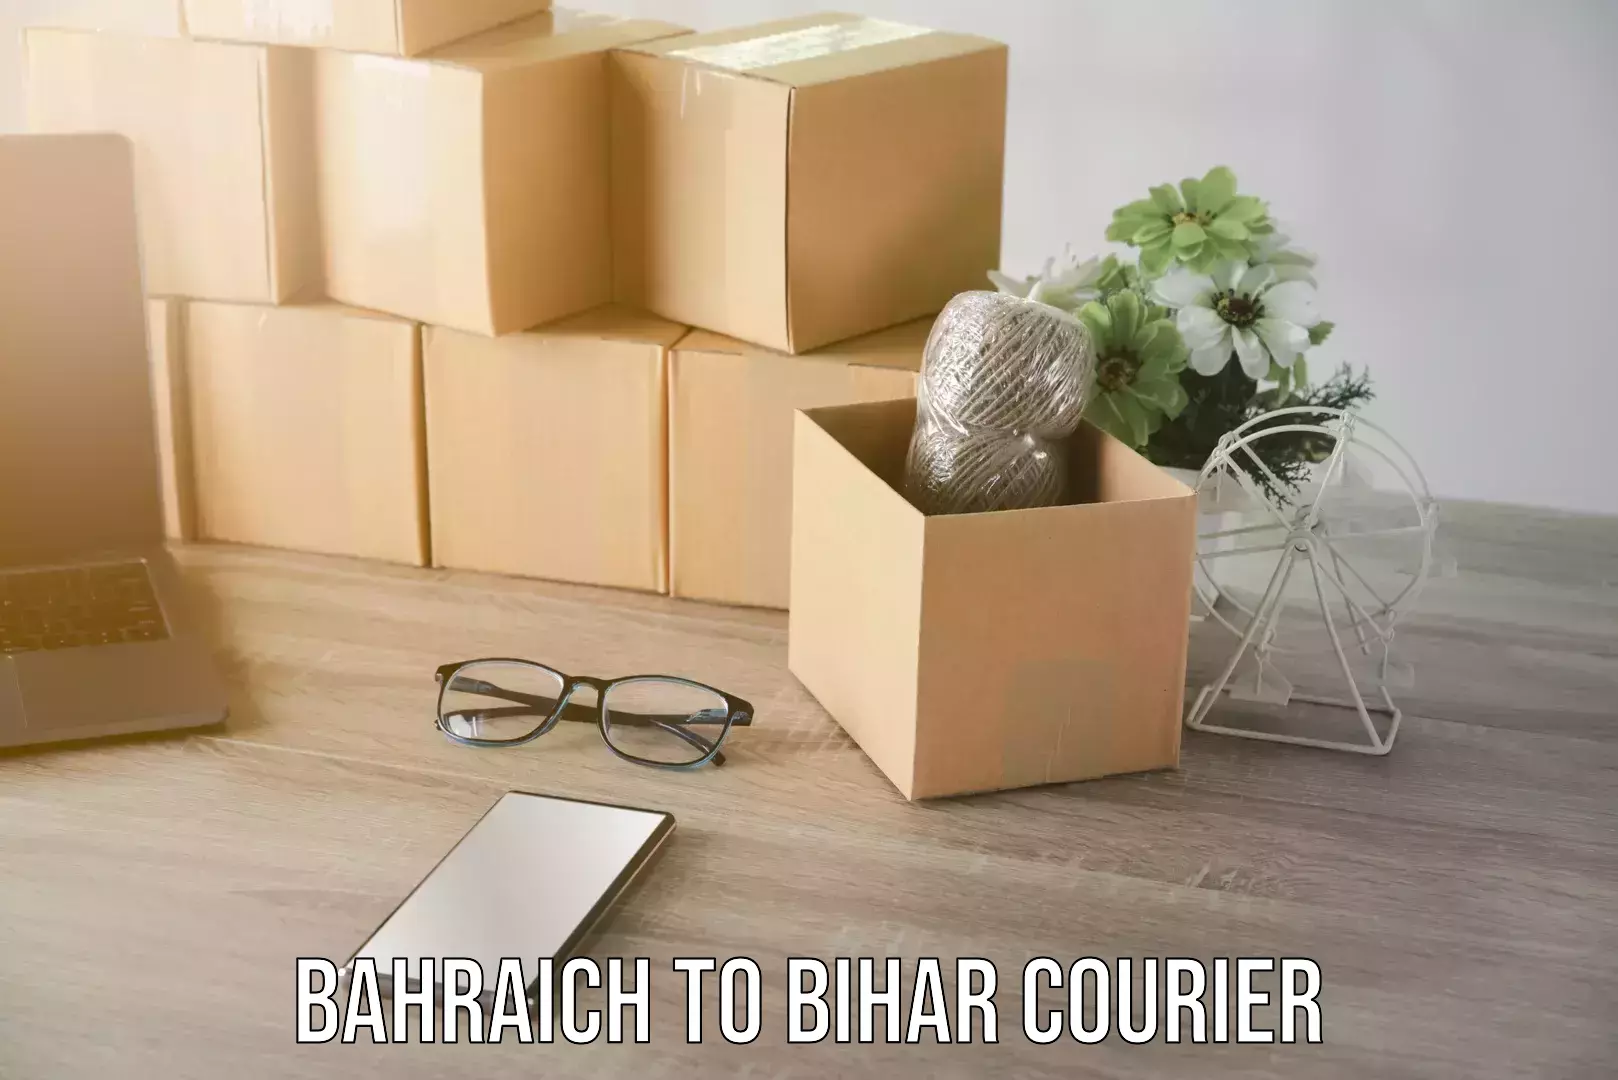 24-hour courier services Bahraich to Maheshkhunt